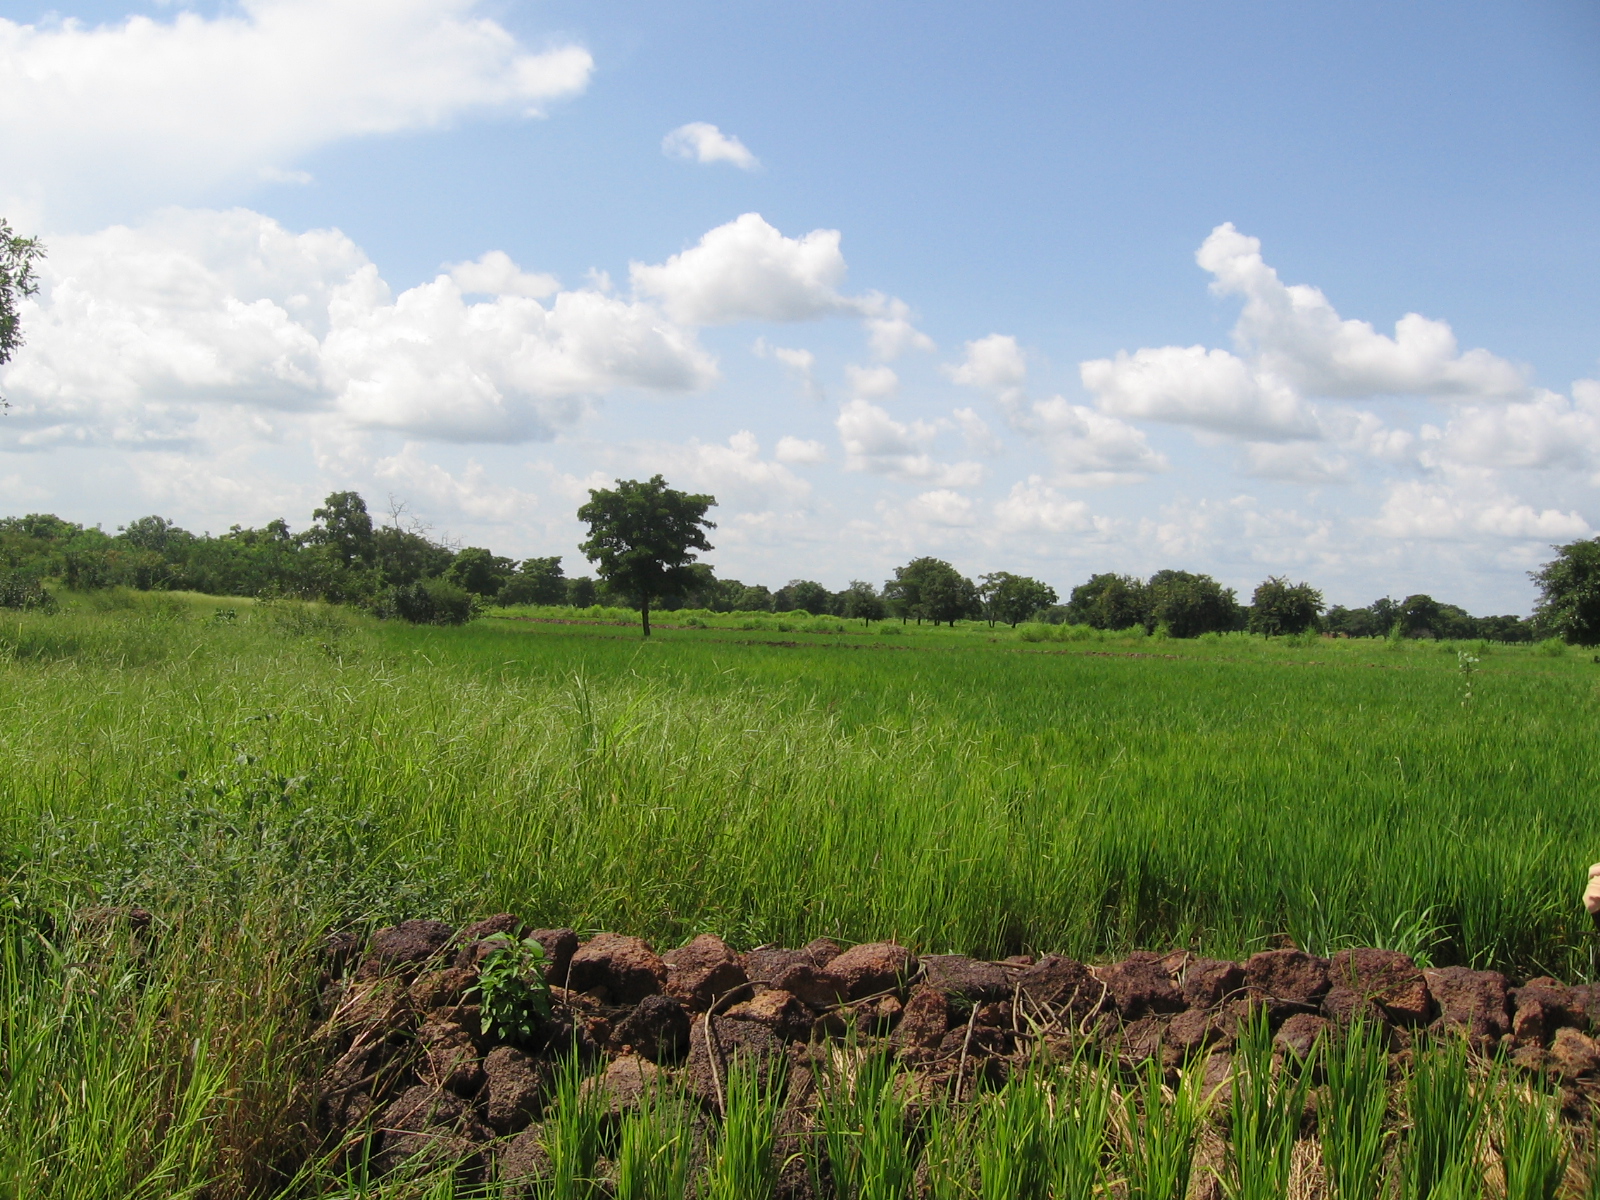 Permeable rock dam and rice fields in Burkina Faso - Photo by Brent Simpson